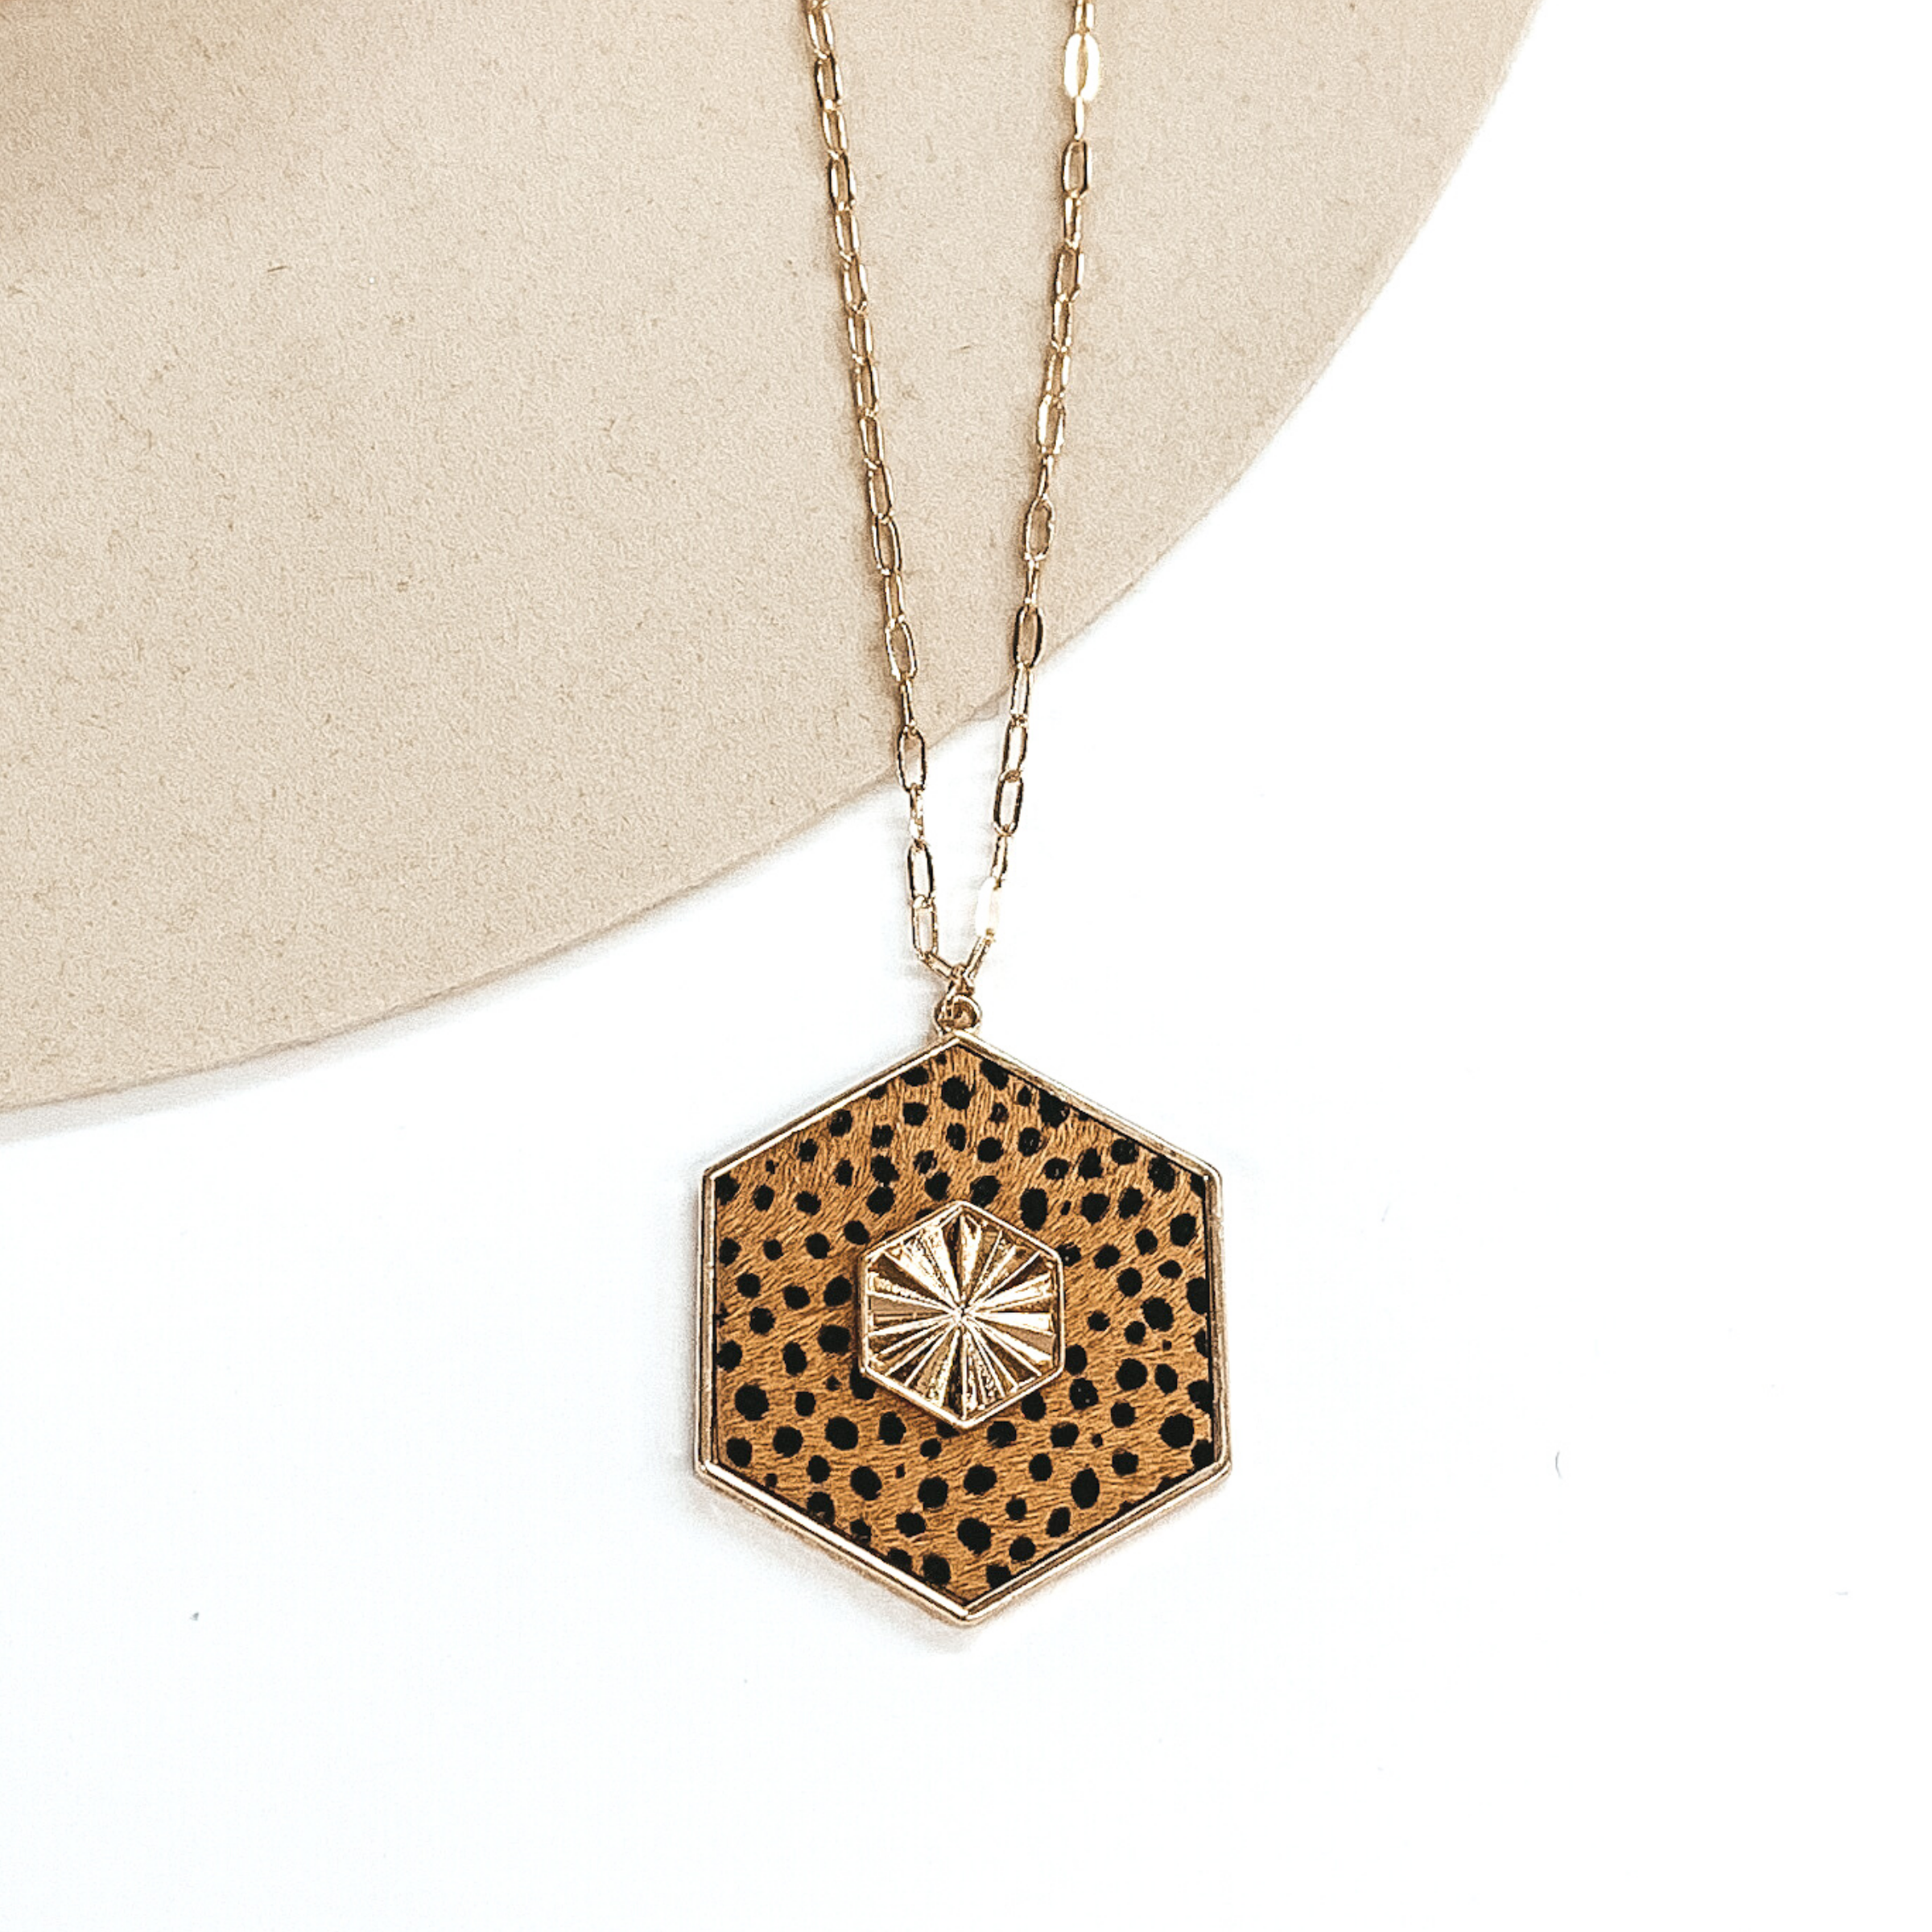 Thin, gold chained necklace with an tan hexagon pendant with a black cheetah print. The pendant is outlined in gold and has a gold, textured hexagon charm in the center. This necklace is pictured on a white and beige background.